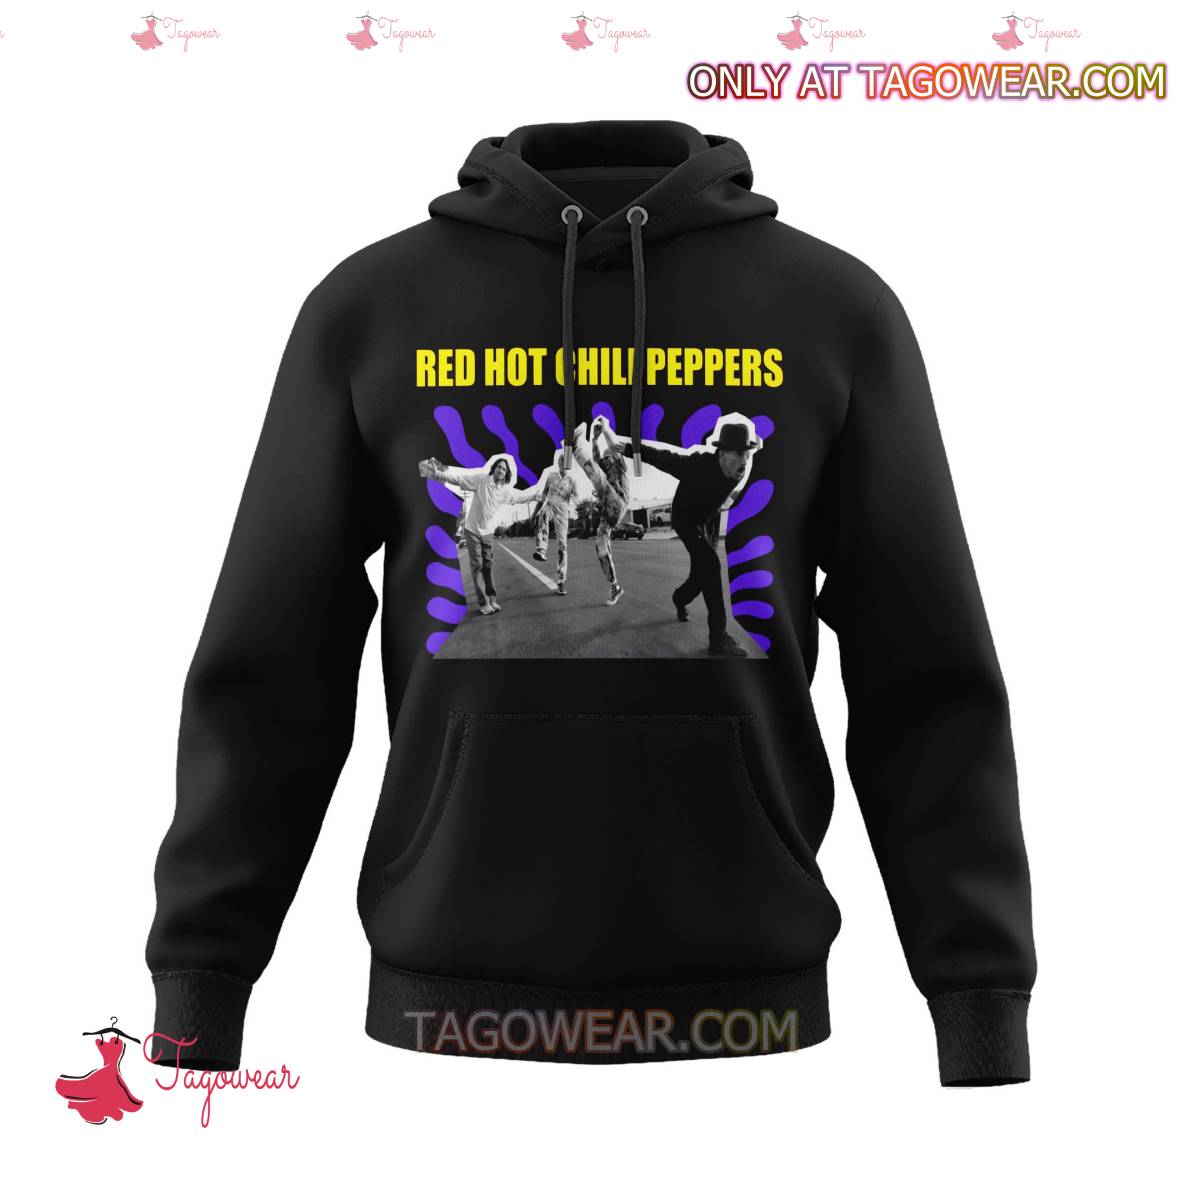 Red Hot Chilli Pepper Tour With Special Guests Kid Cudi, Ice Cube T-shirt, Hoodie a